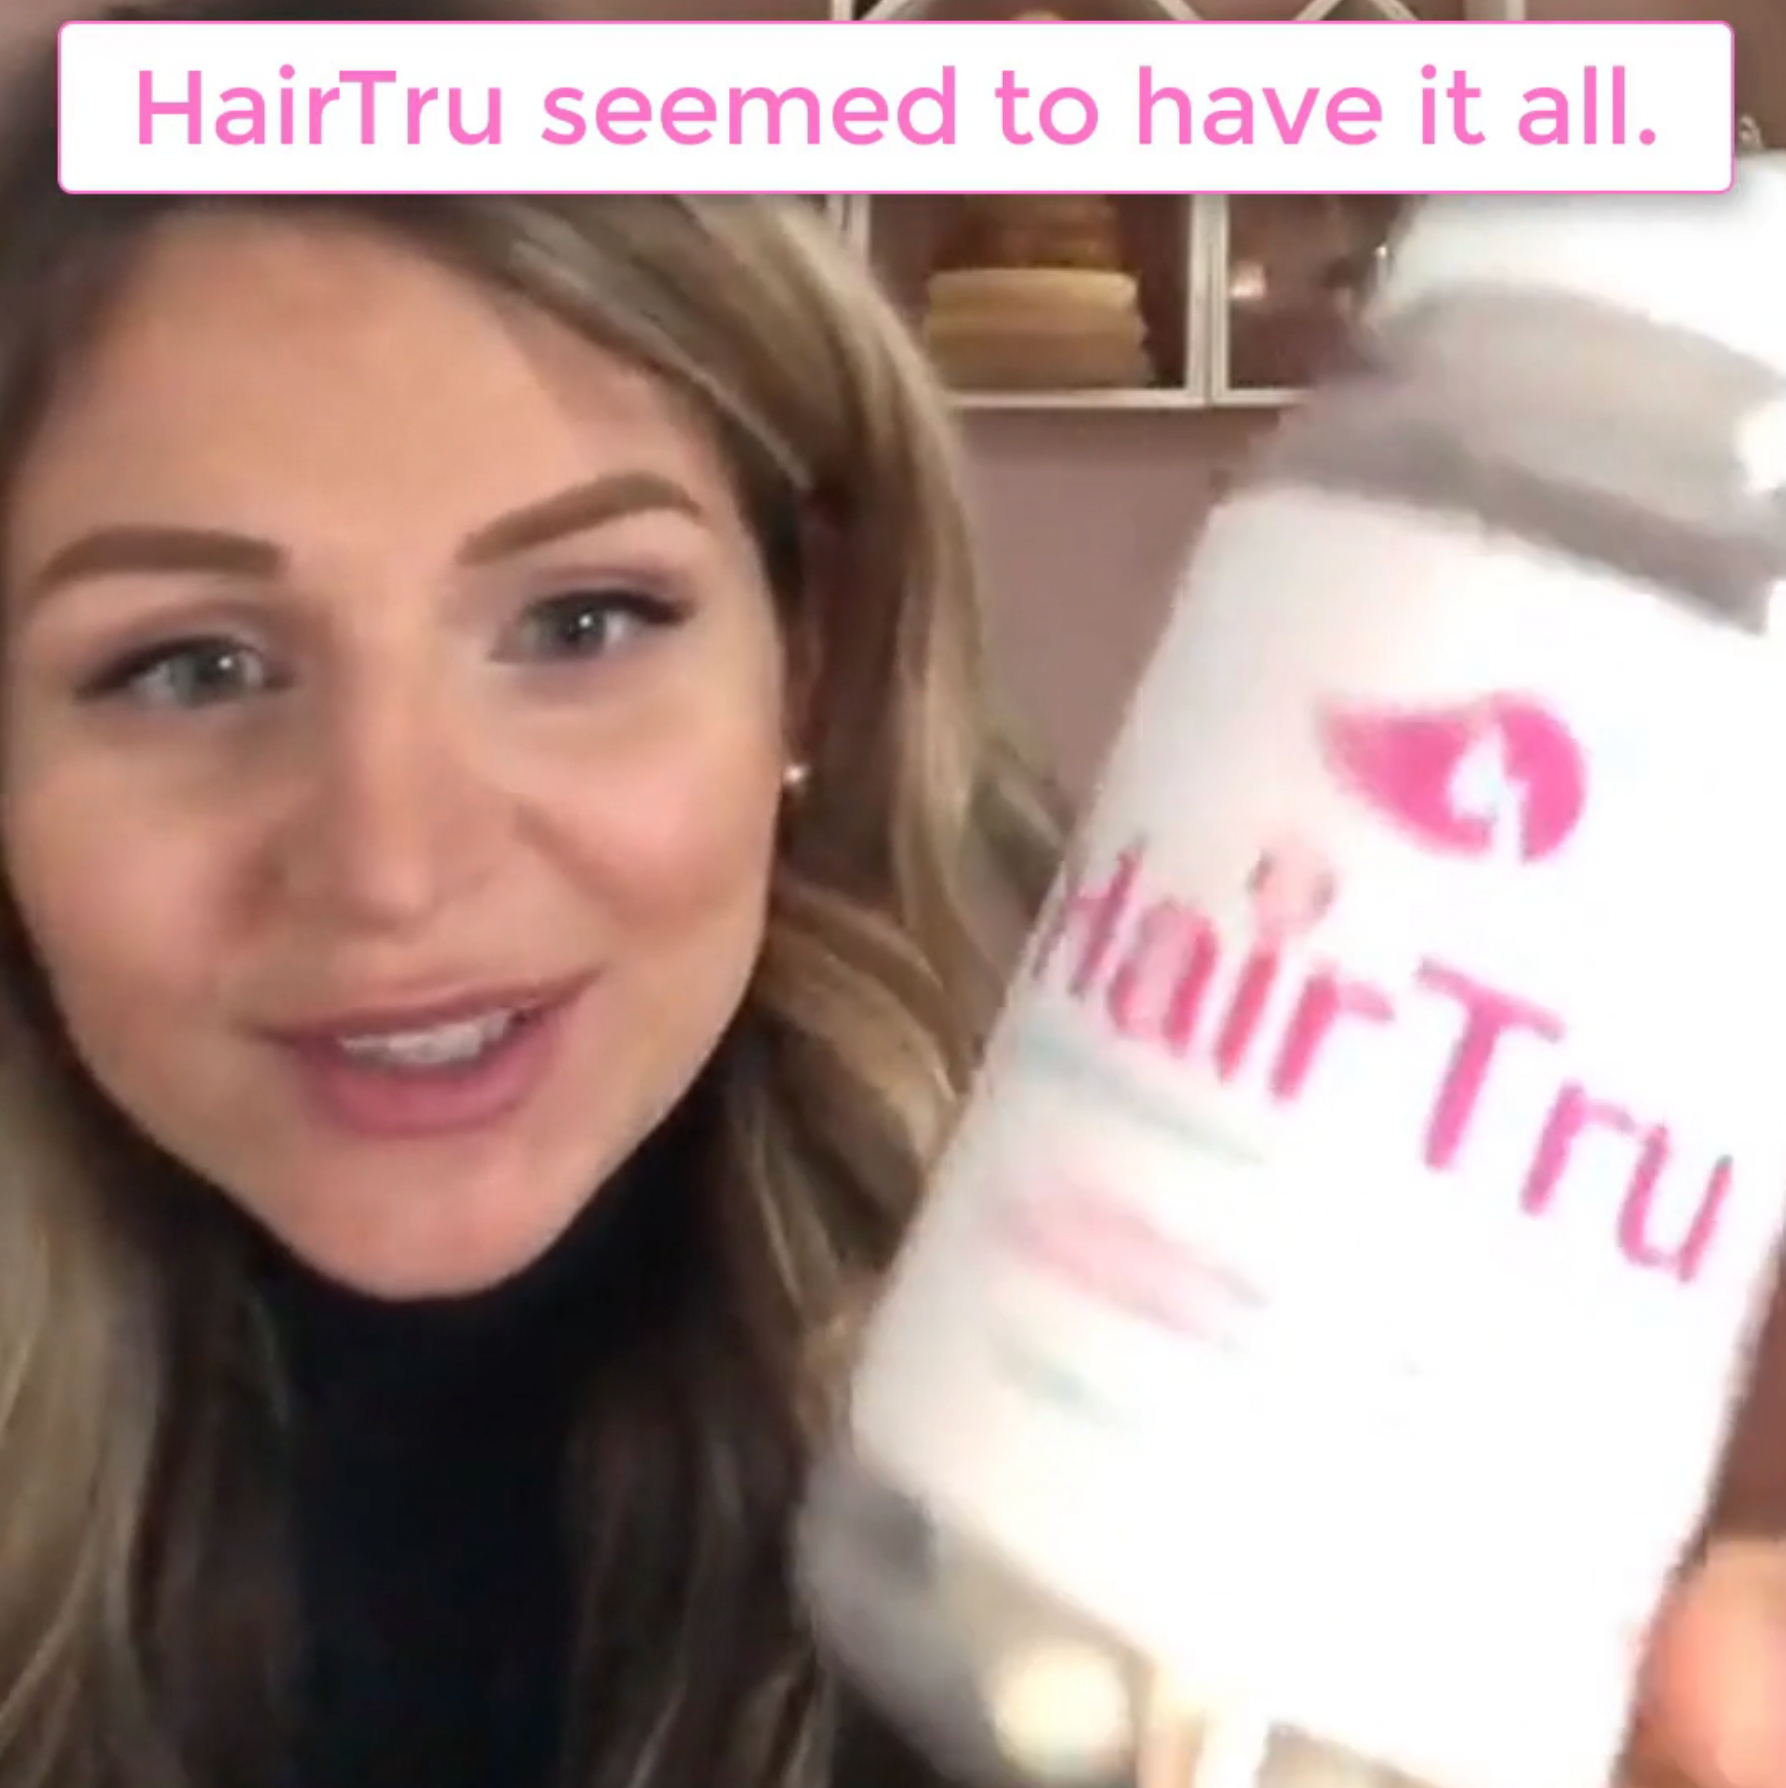 reviewing hairtru vitamin - my personal experience